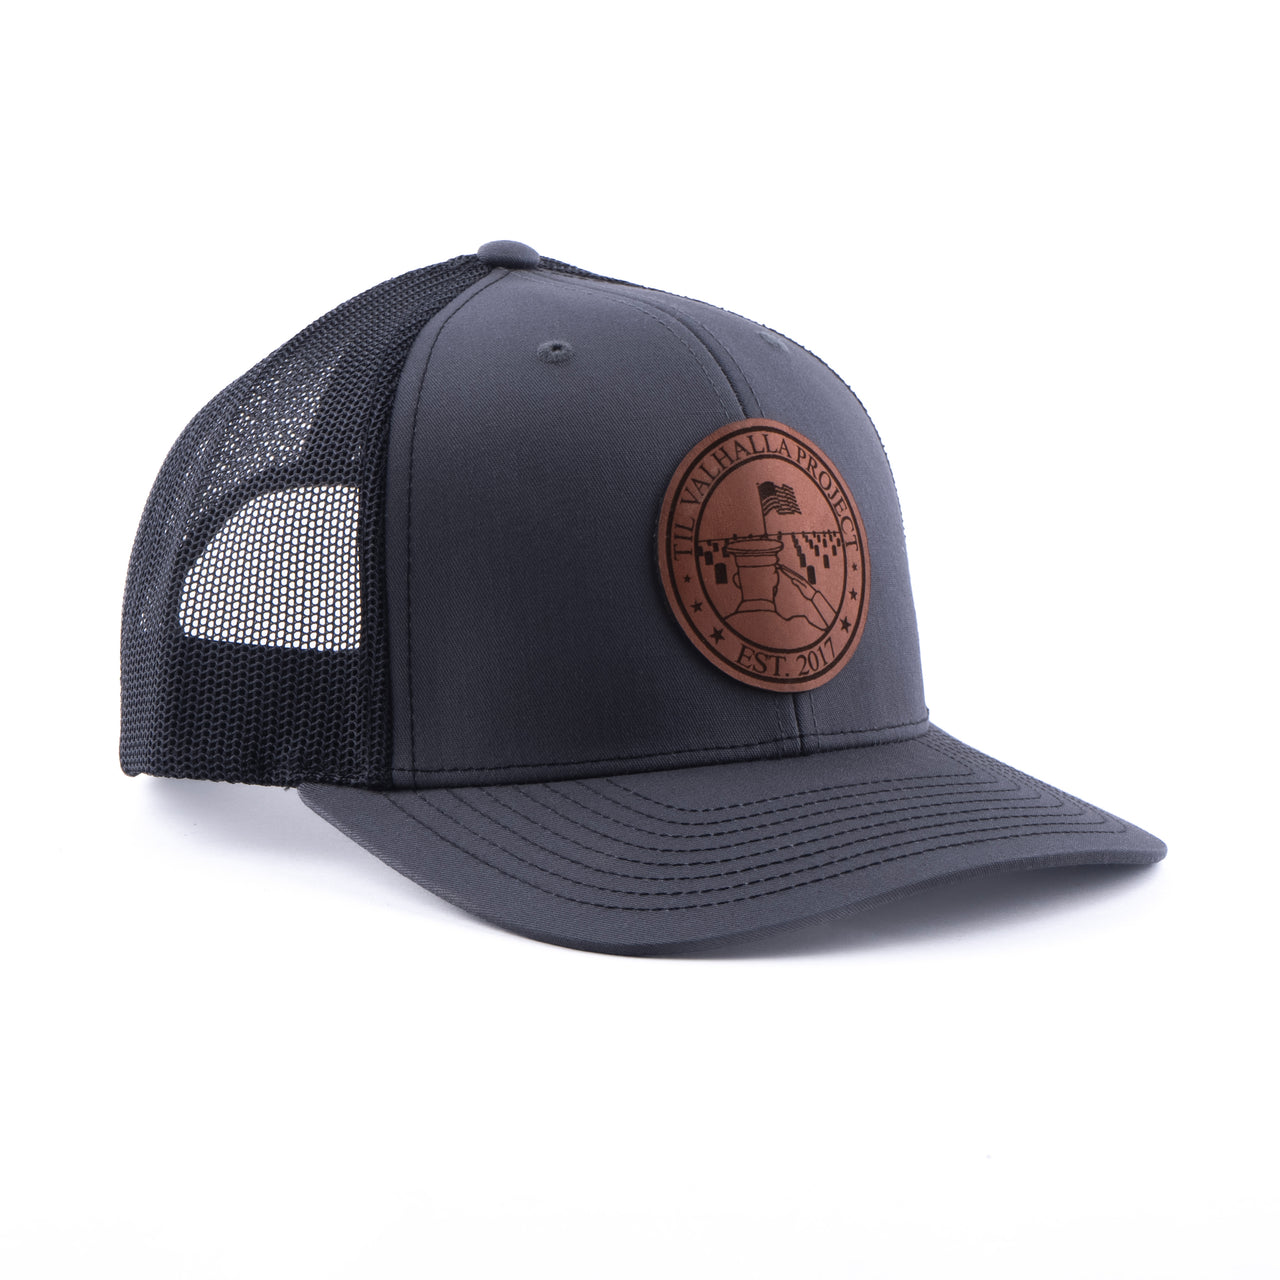 T.V.P. Logo Leather Patch Hat